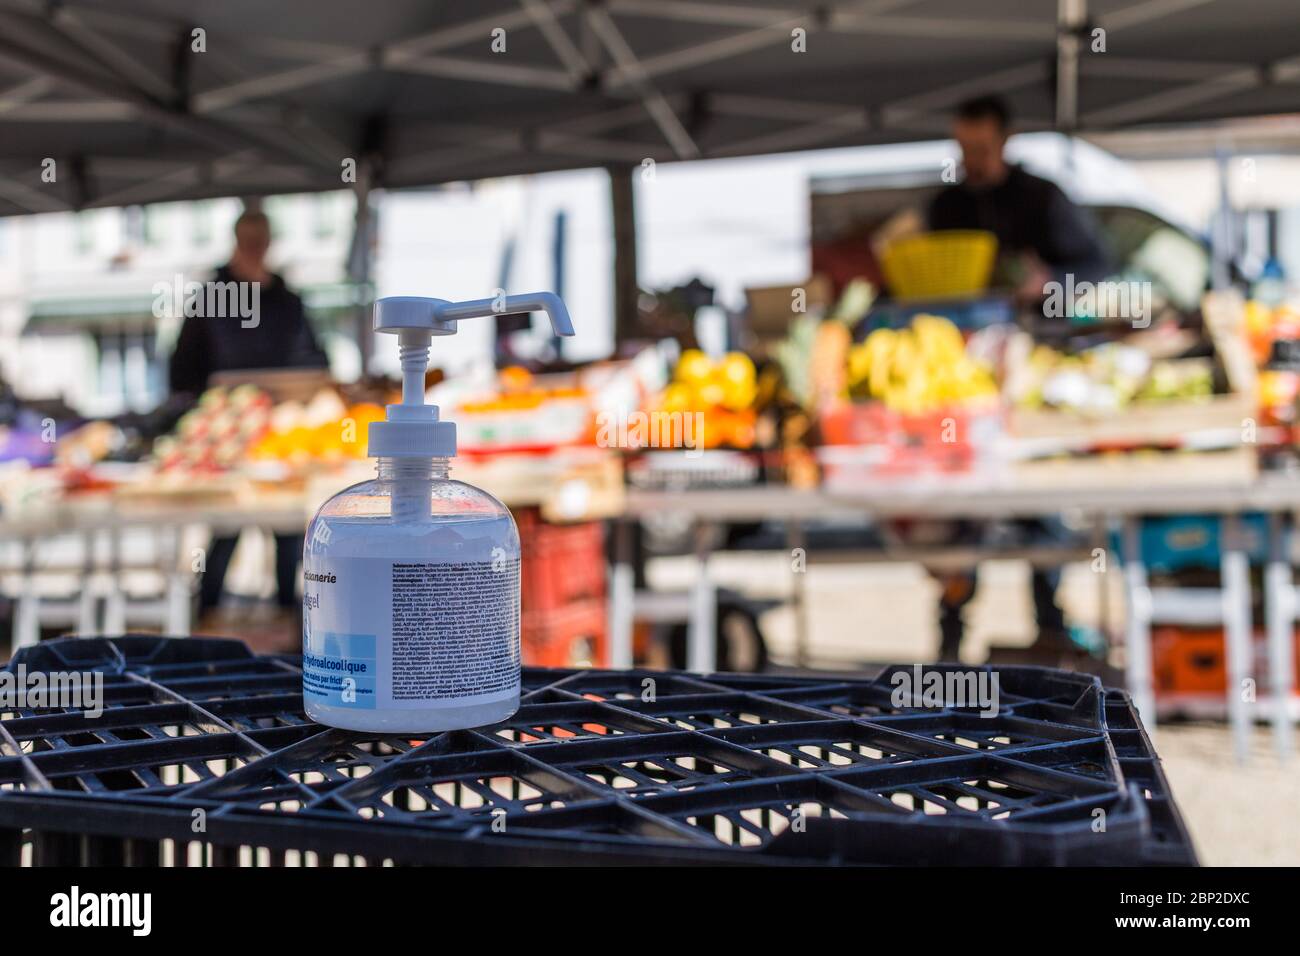 Local market authorized during the 2019-nCoV epidemic, hydroalcoholic gel made available at the market center, Dordogne, France. Stock Photo